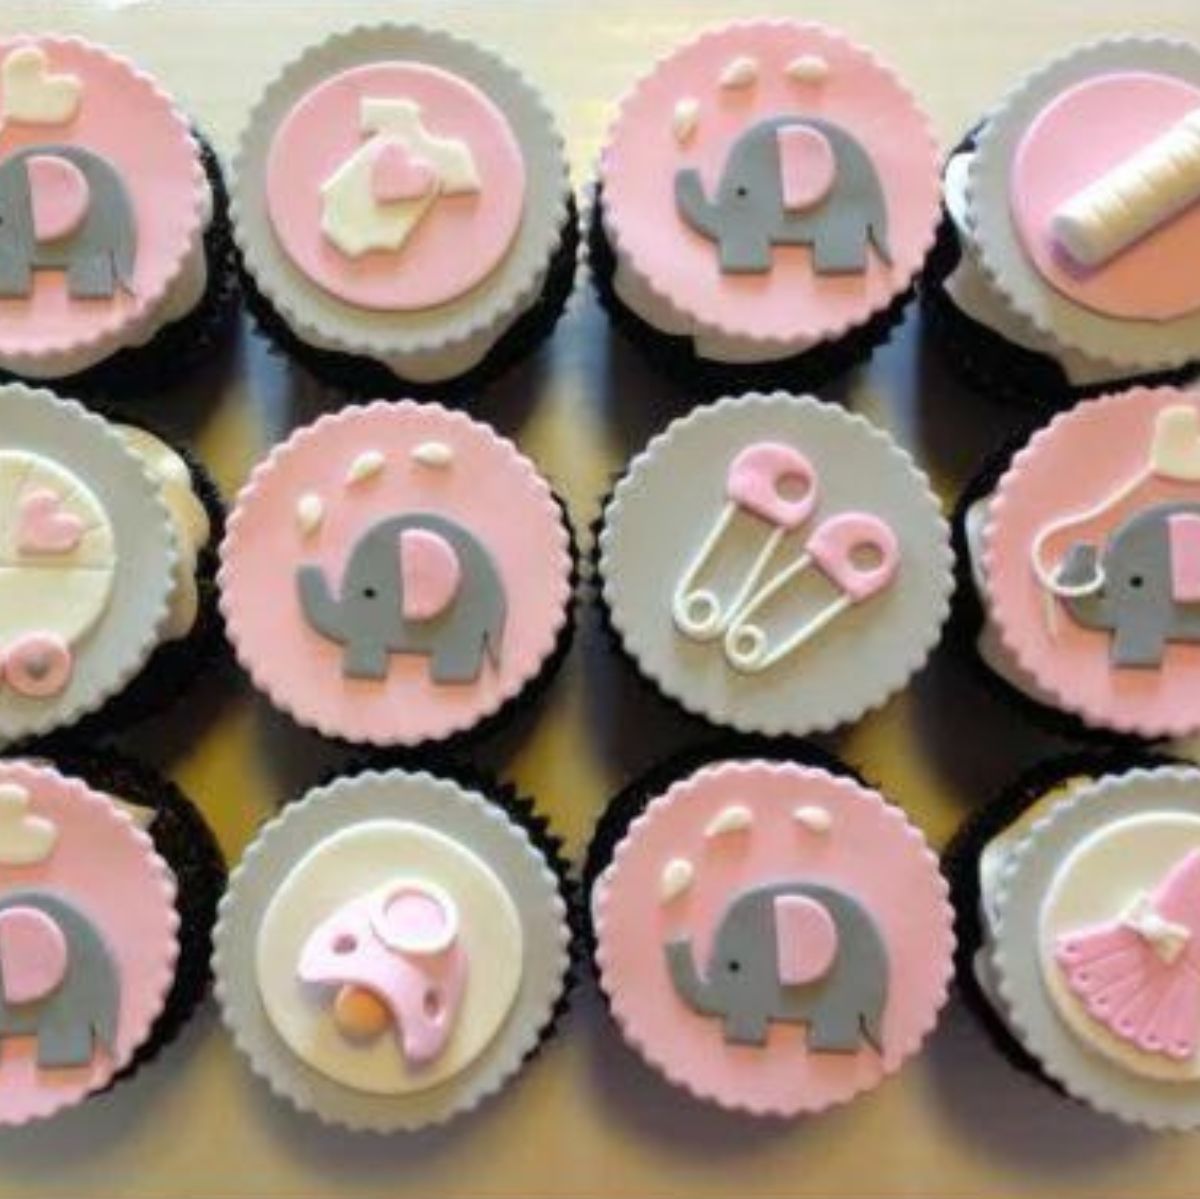 It's a Girl Baby Shower Cupcakes